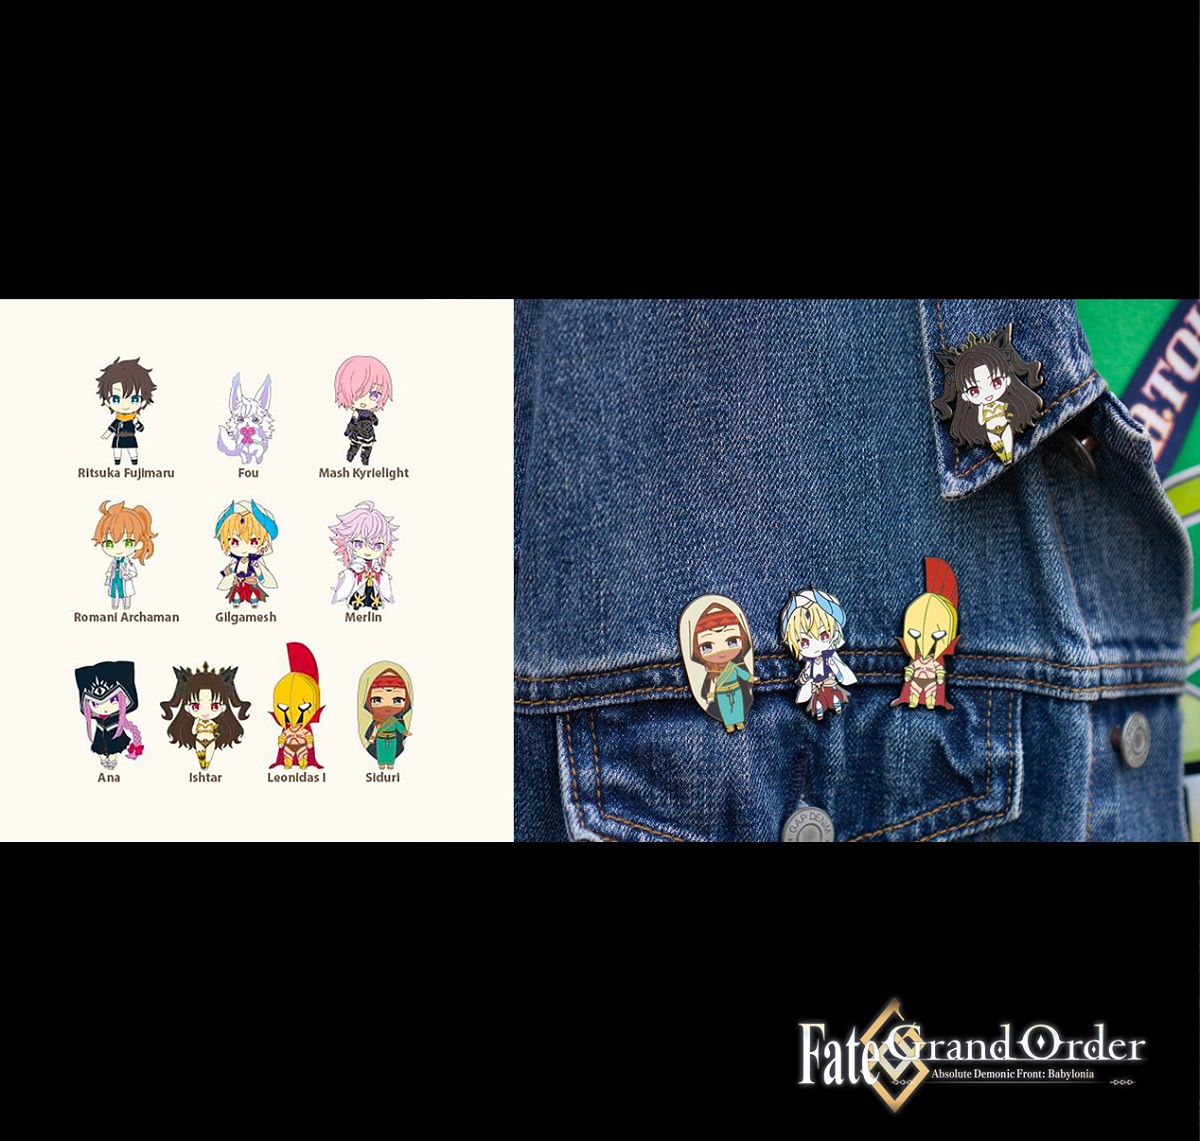 1st Edition Fate/Grand Order Absolute Demonic Front: Babylonia Collectible Pins image count 0